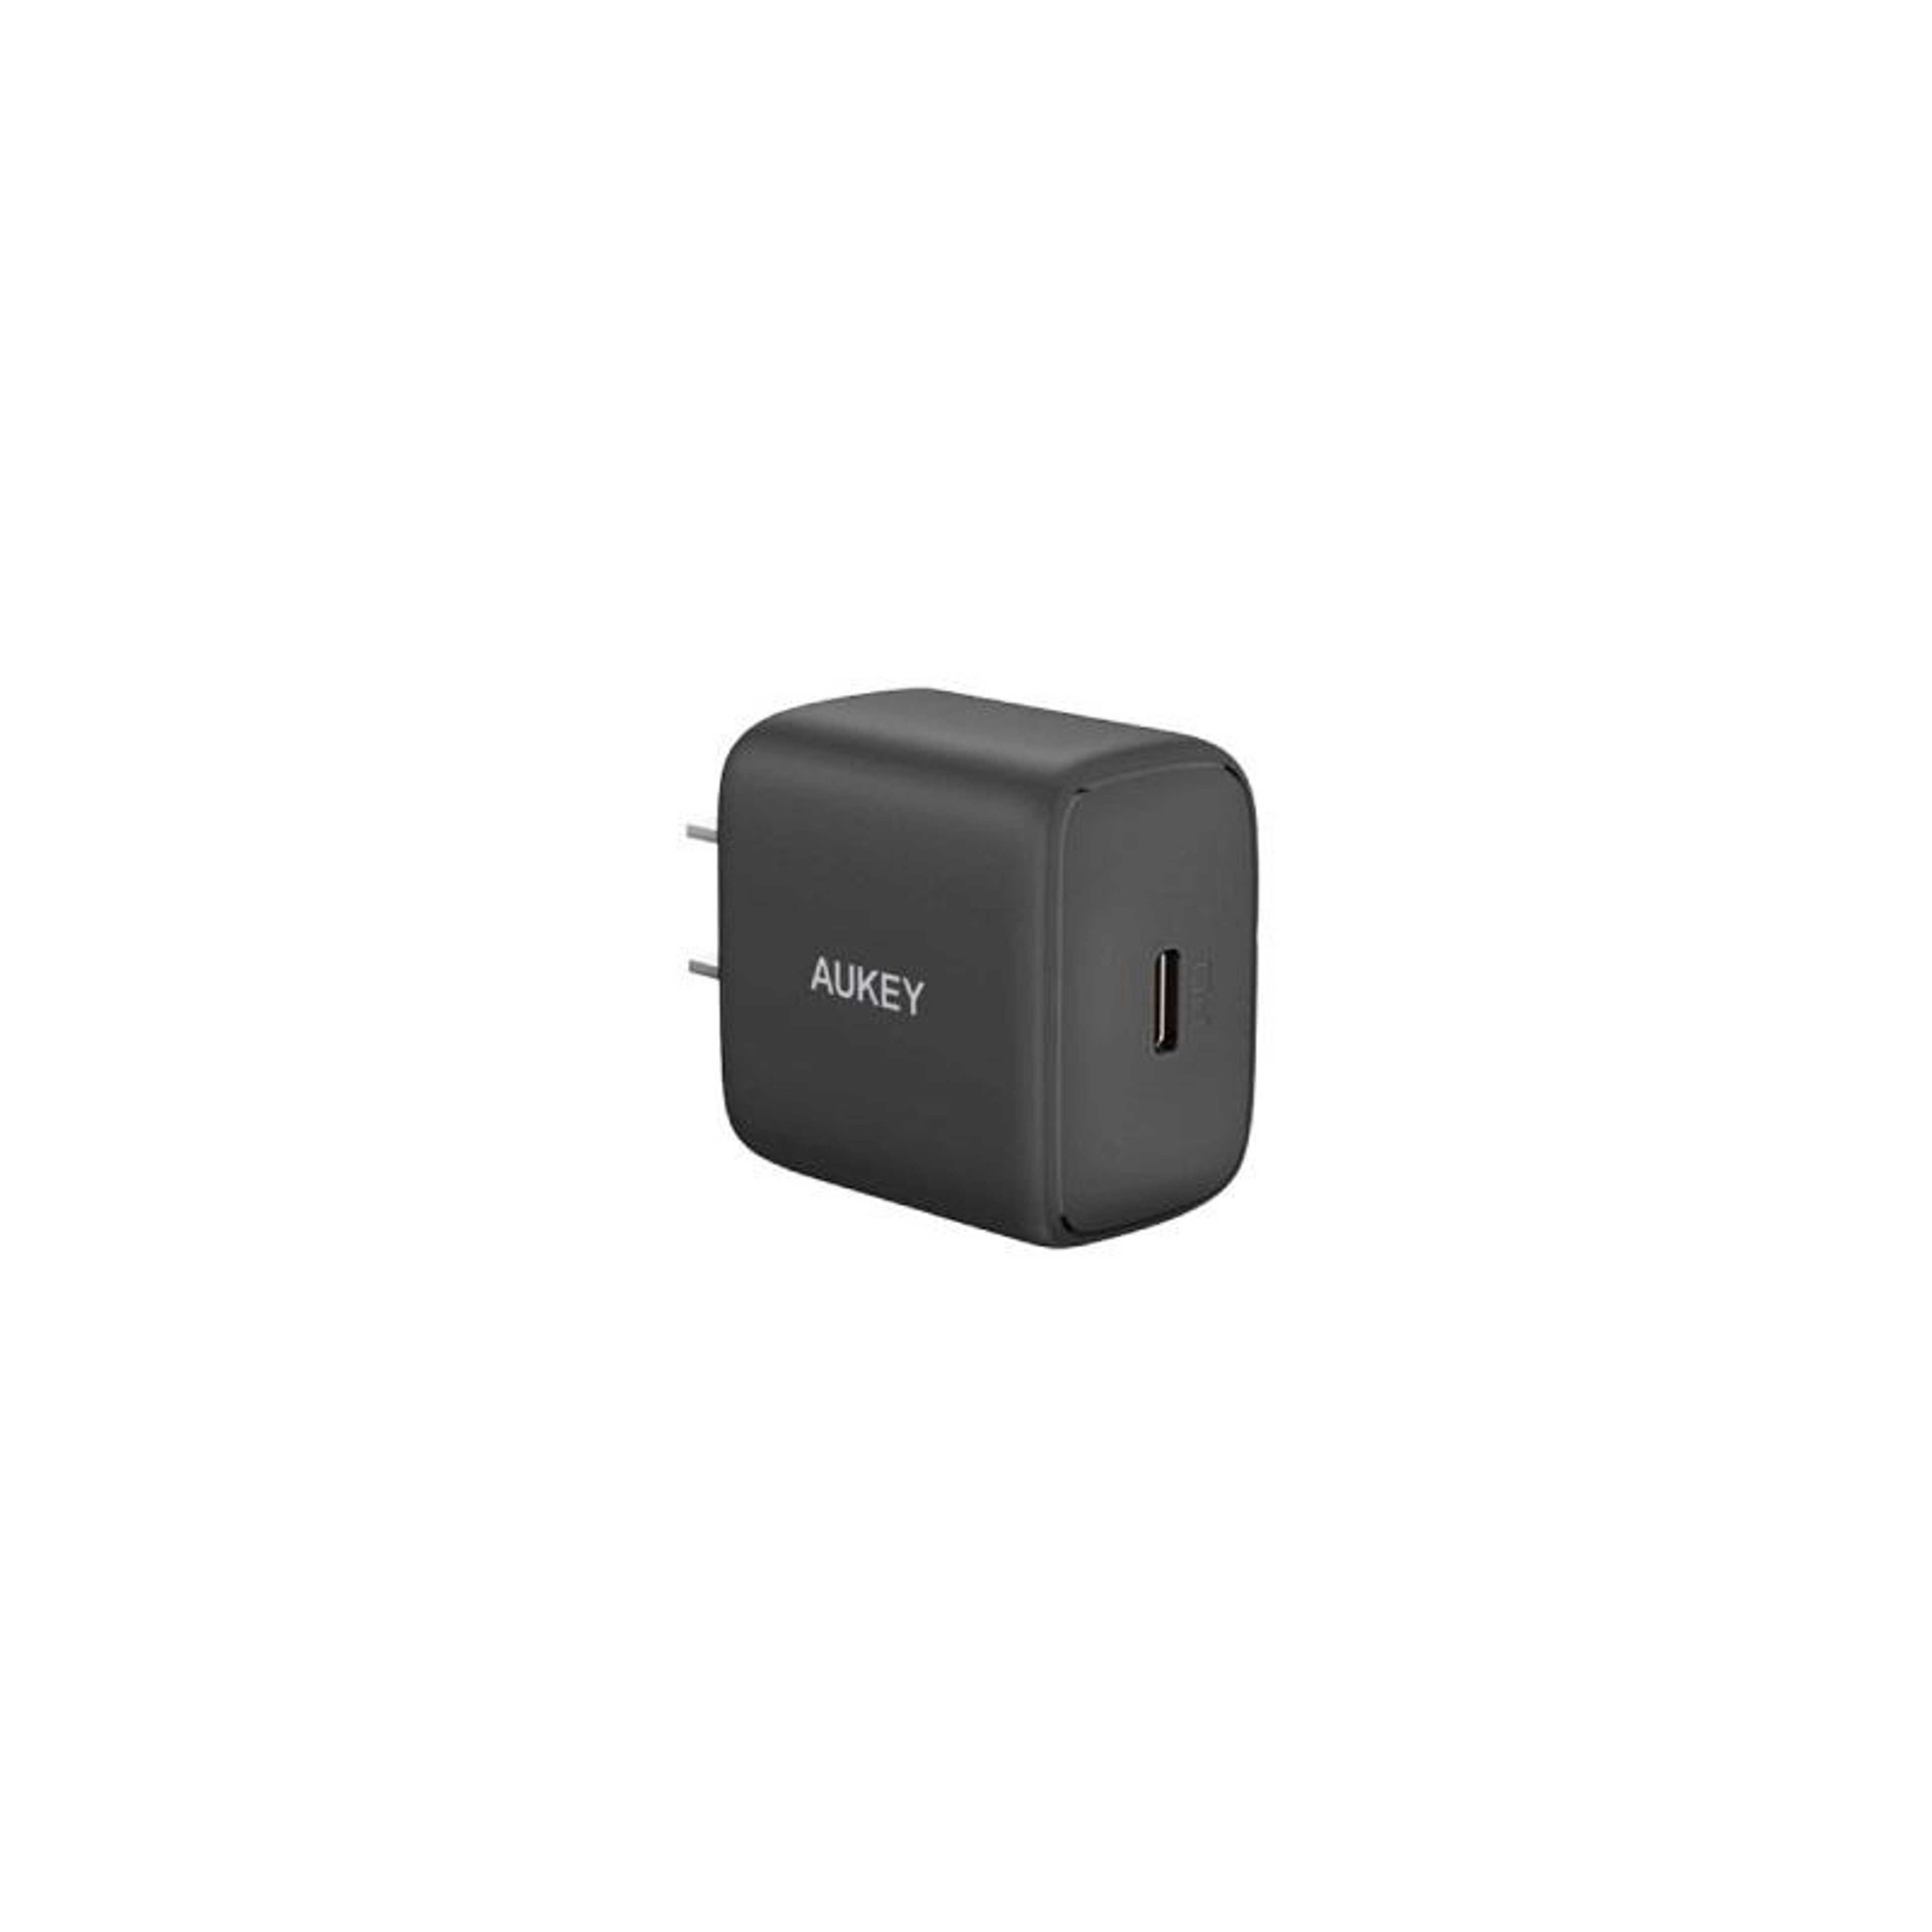 Aukey Swift 25W PD Wall Charger (PA-R1A)